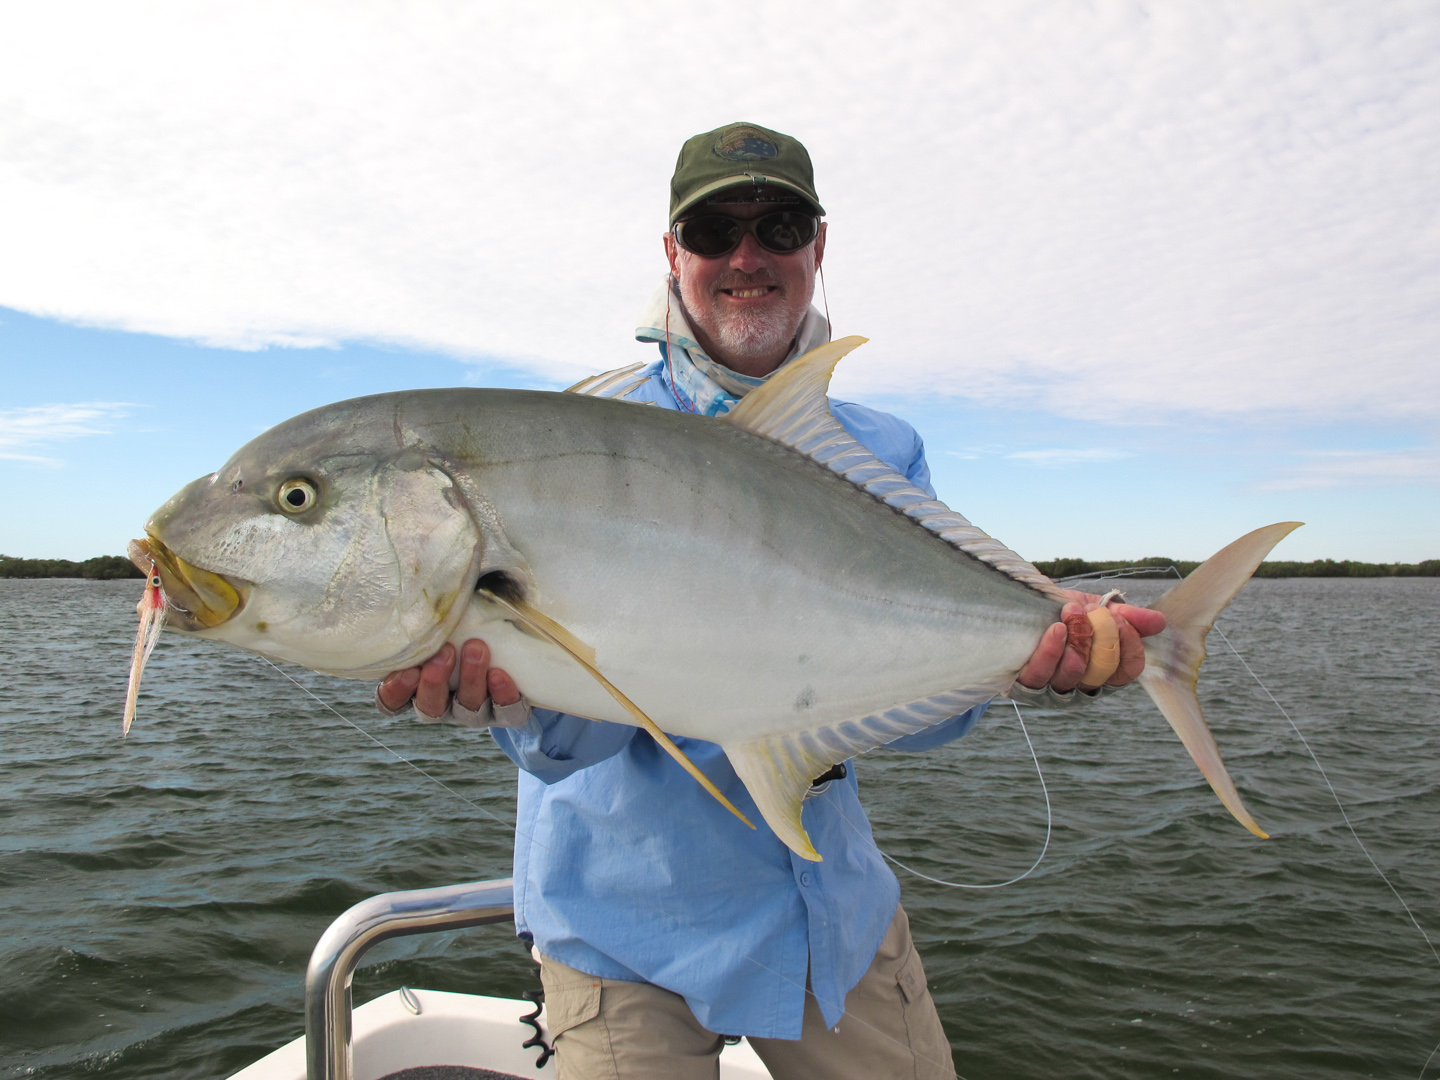 Giant Trevally on fly, Golden Trevally on fly, Saltwater fly fishing, learning to fly fish